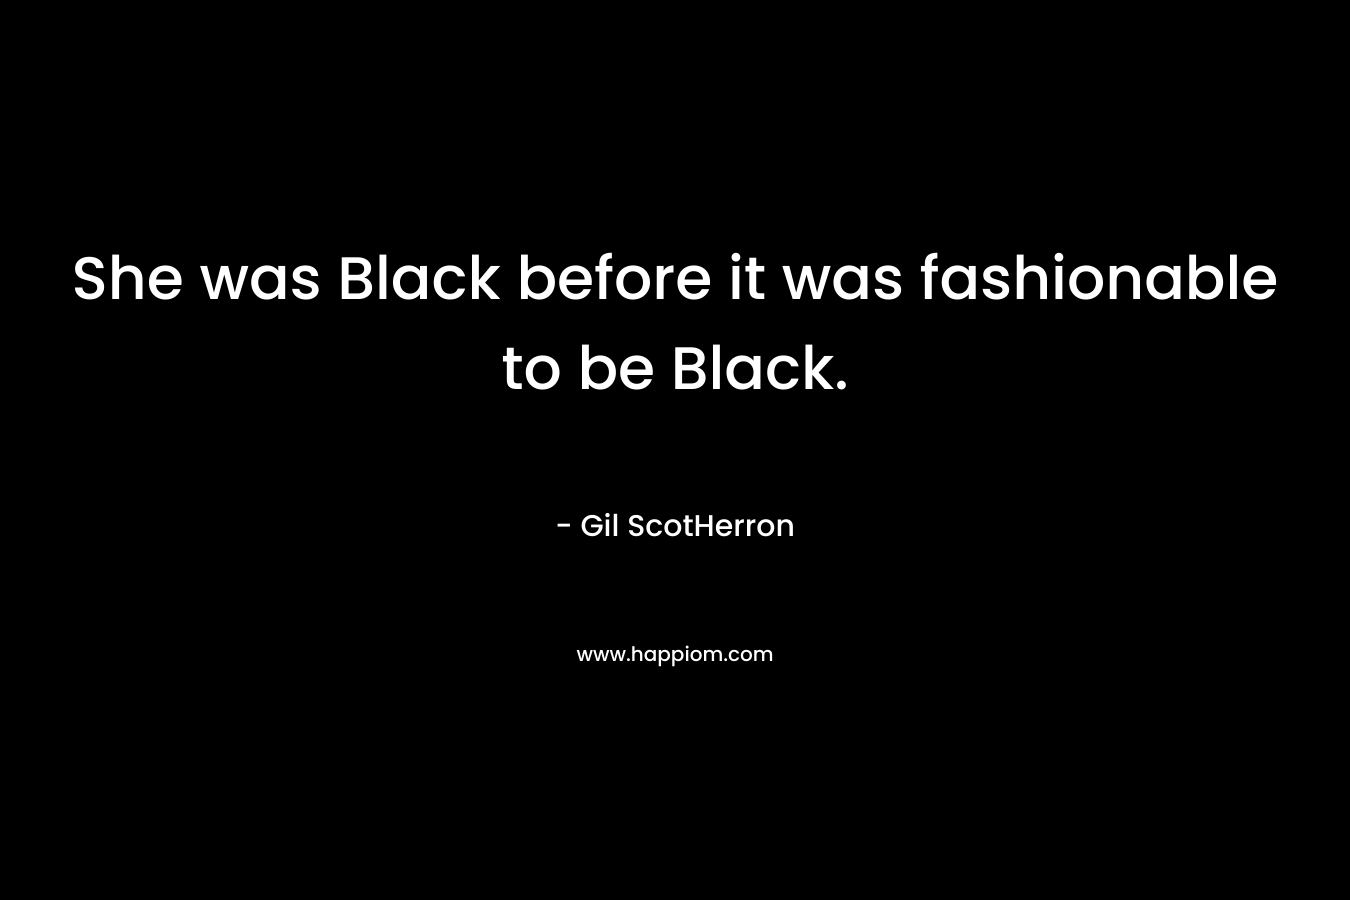 She was Black before it was fashionable to be Black.